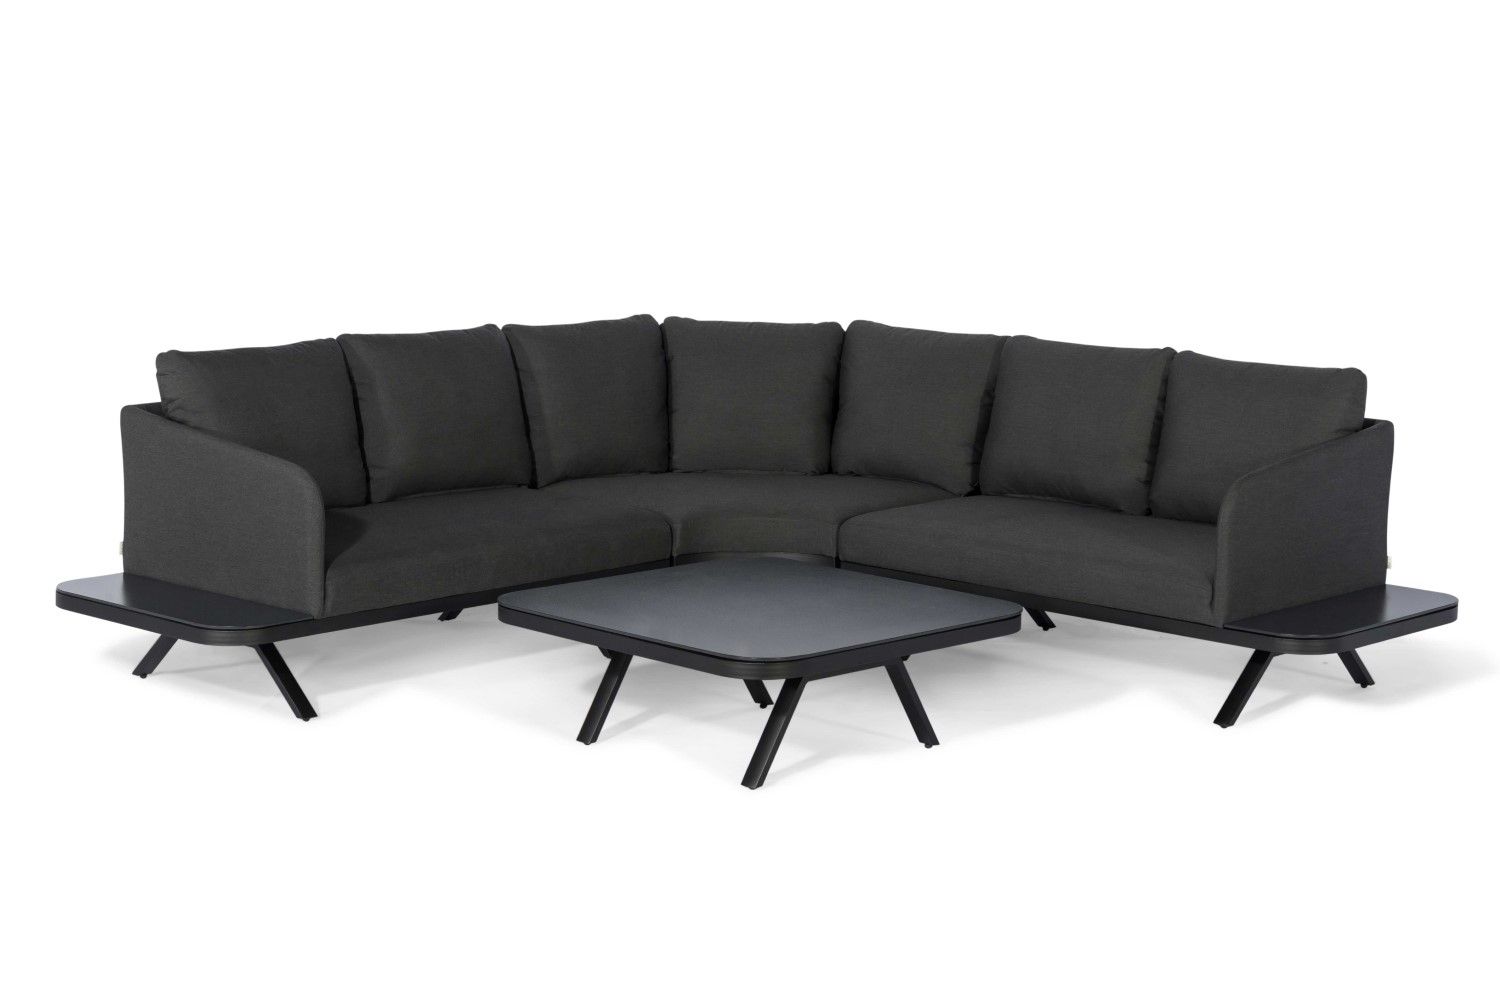 Maze Rattan – Cove Corner Sofa Group – Charcoal – Ls Living With Regard To Katie Charcoal Sofas (View 10 of 15)